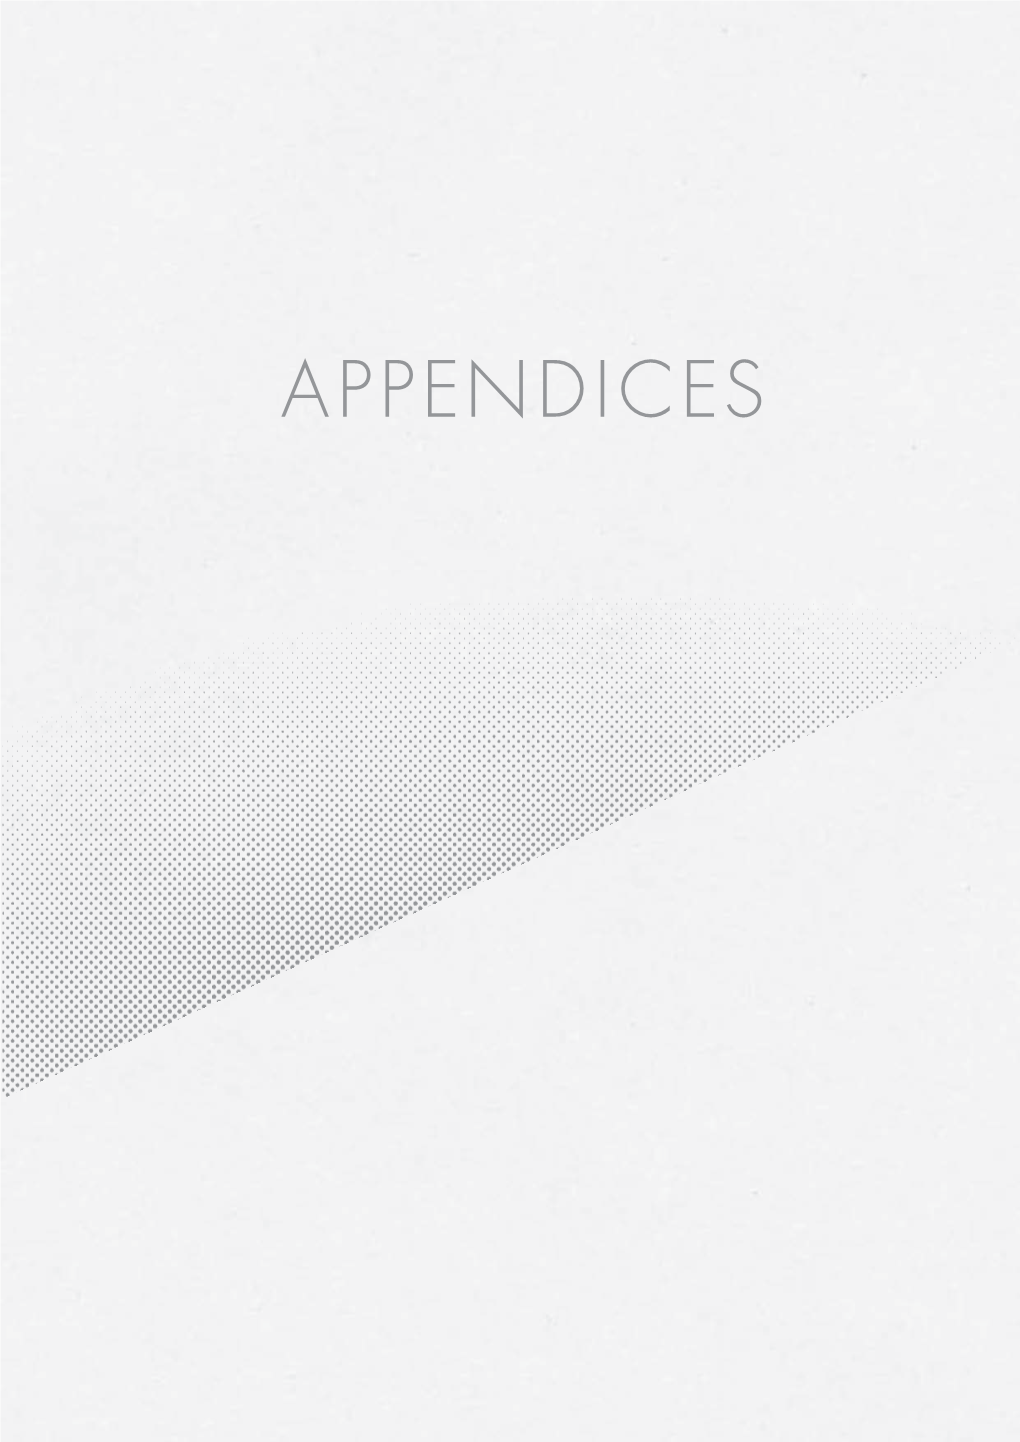 Appendices and Bibliography